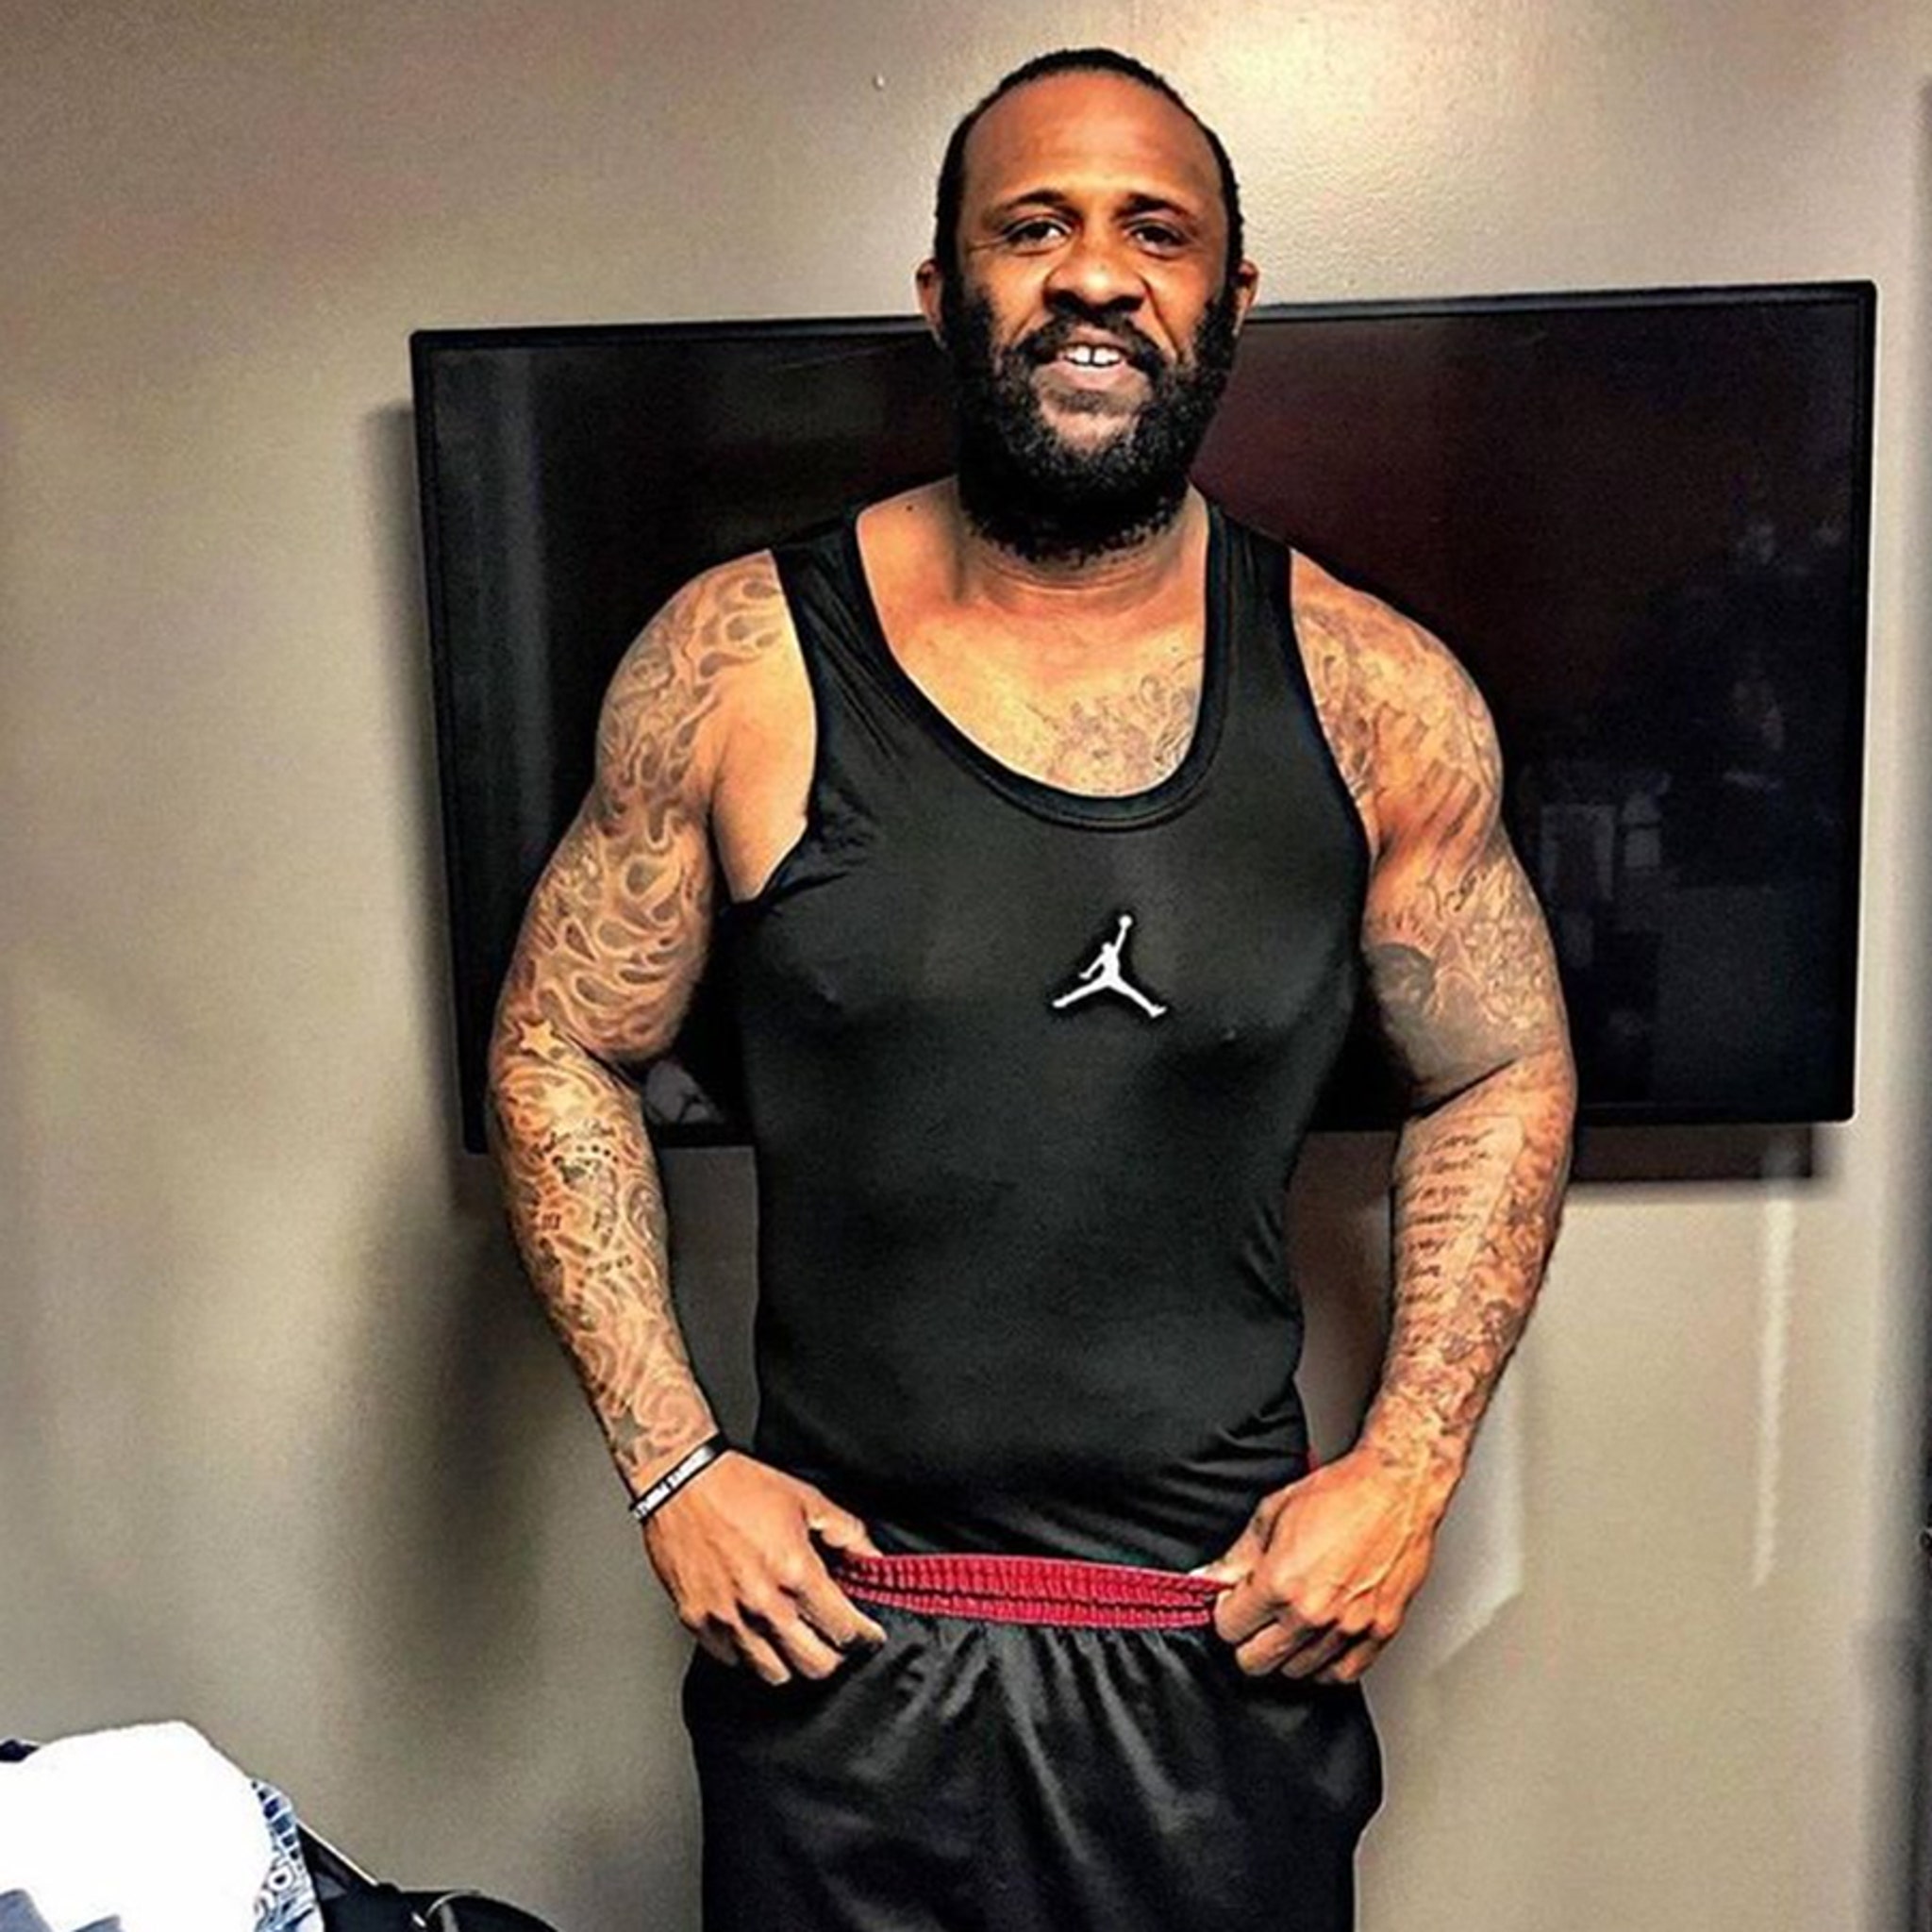 CC Sabathia, weight loss, and release points - River Avenue Blues